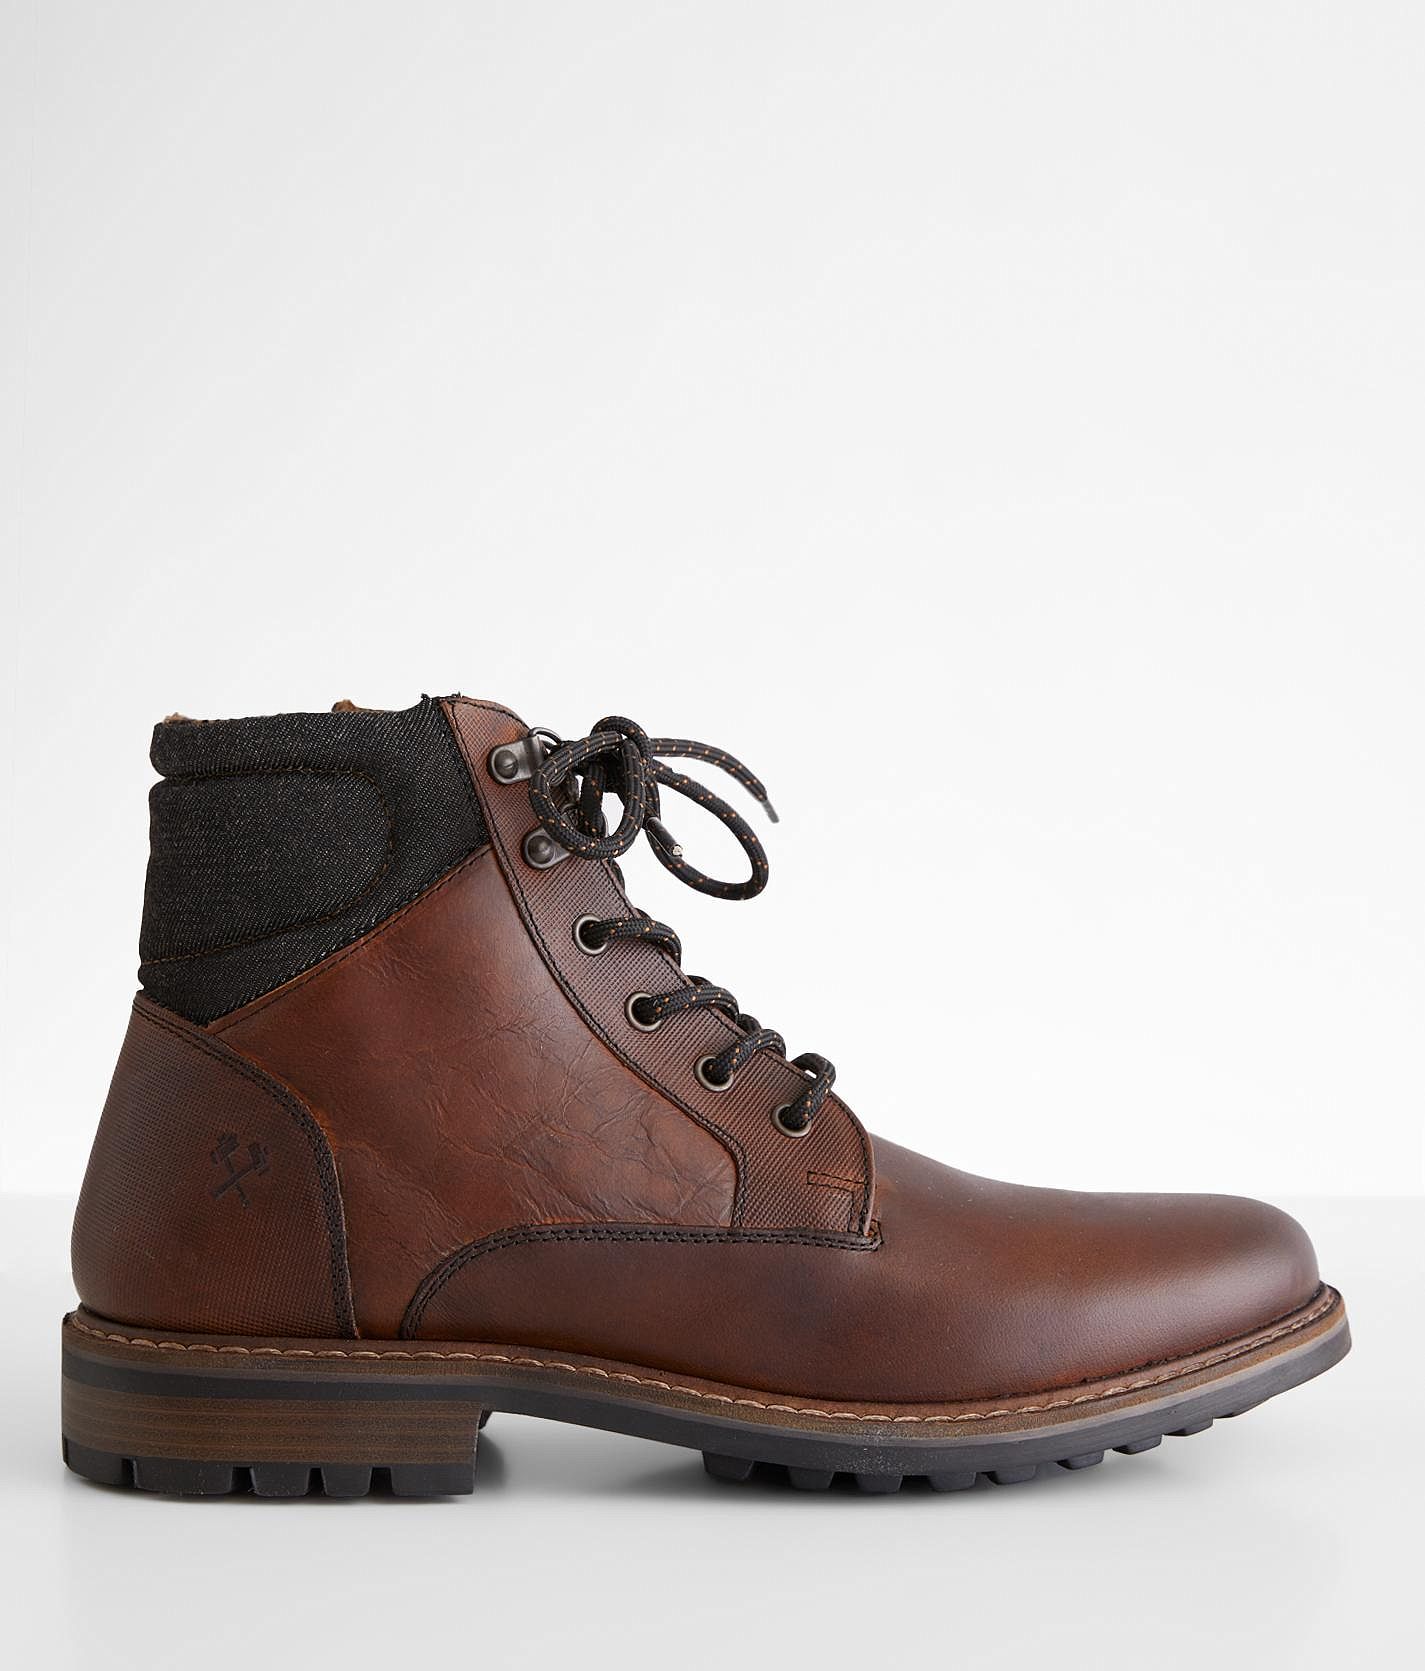 Outpost Makers Brodie Leather Boot - Brown US 9-1/2, Men's